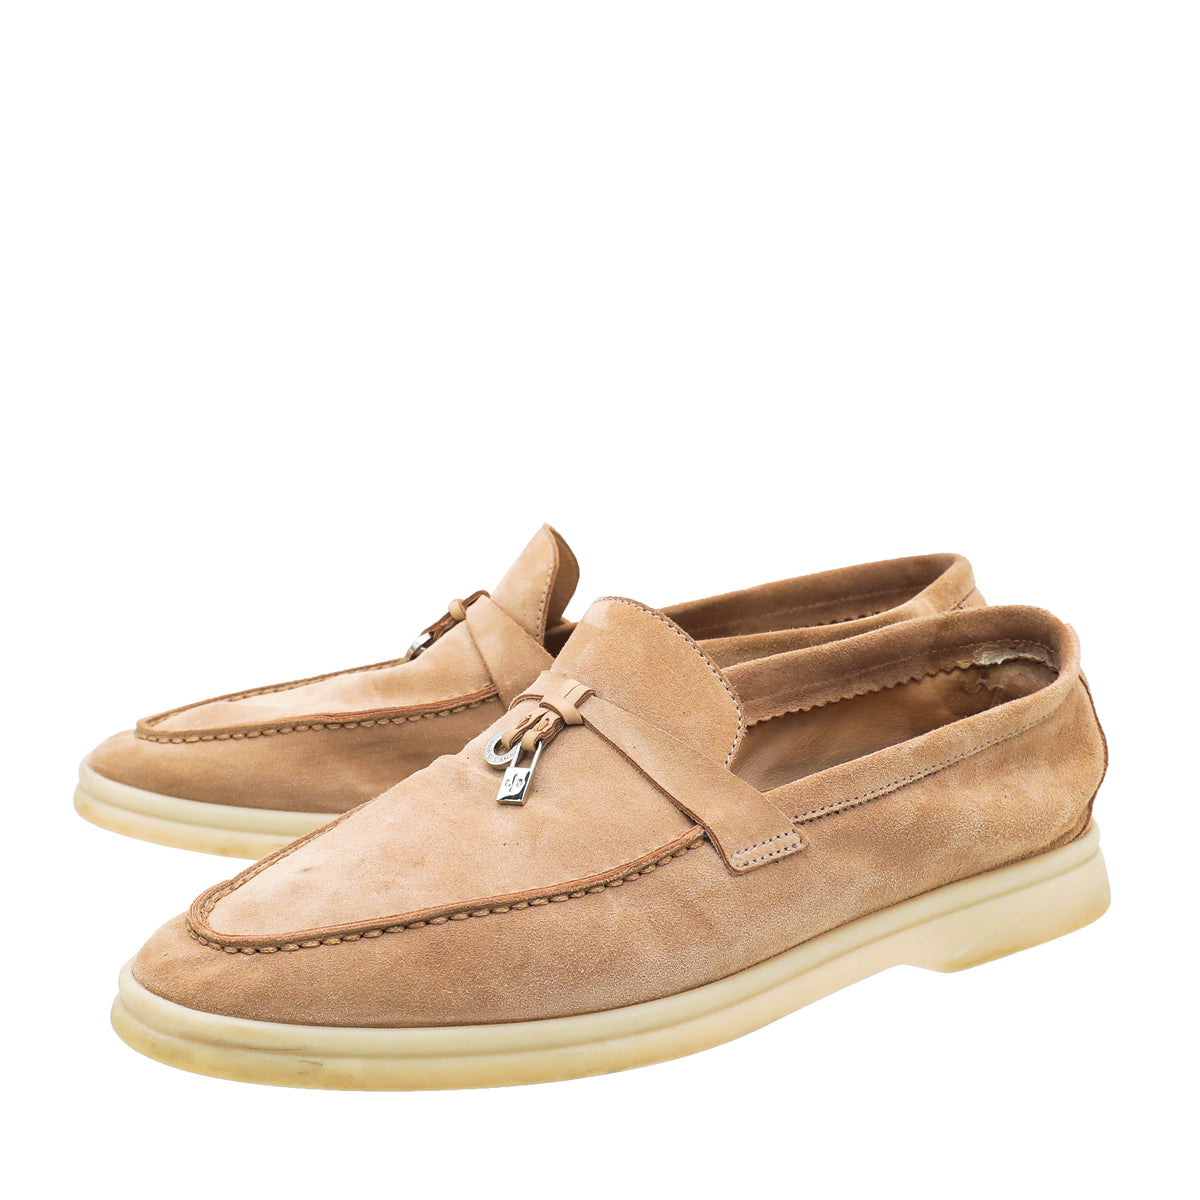 Loro Piana Peanut Butter Summer Charms Moccasin 39.5